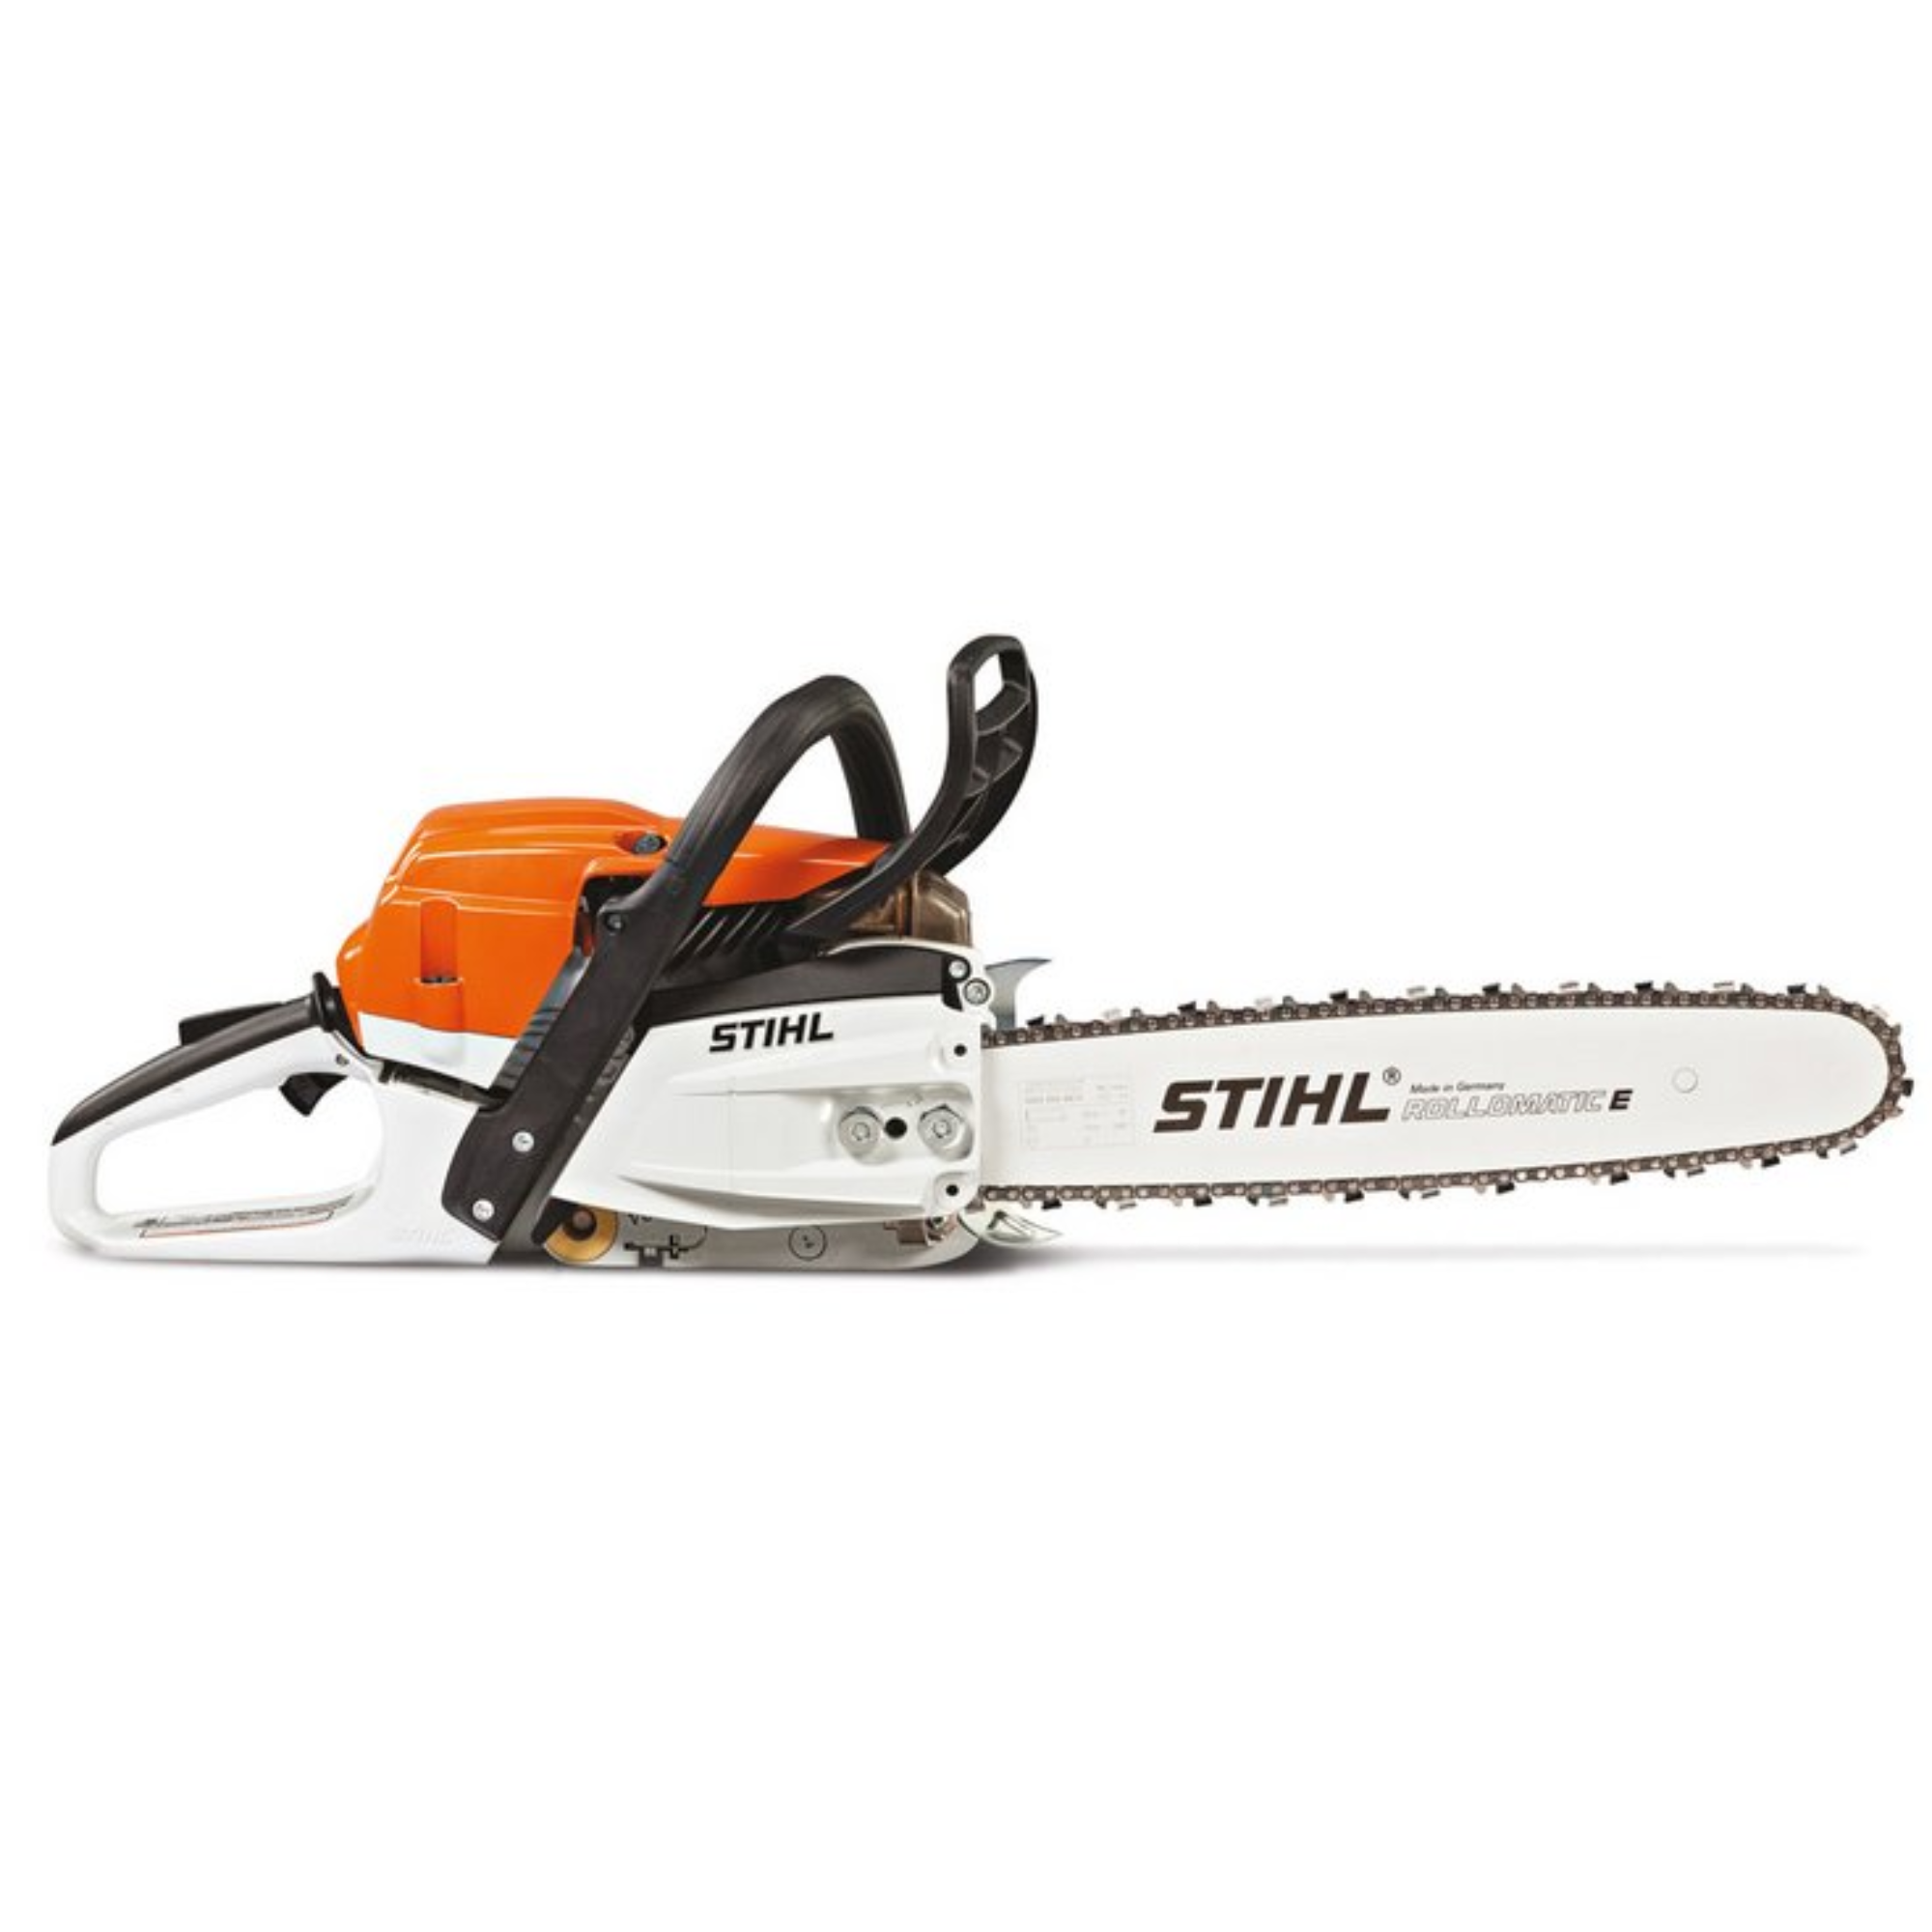 Stihl MS 261 C-M Gas Powered Chainsaw with M-Tronic